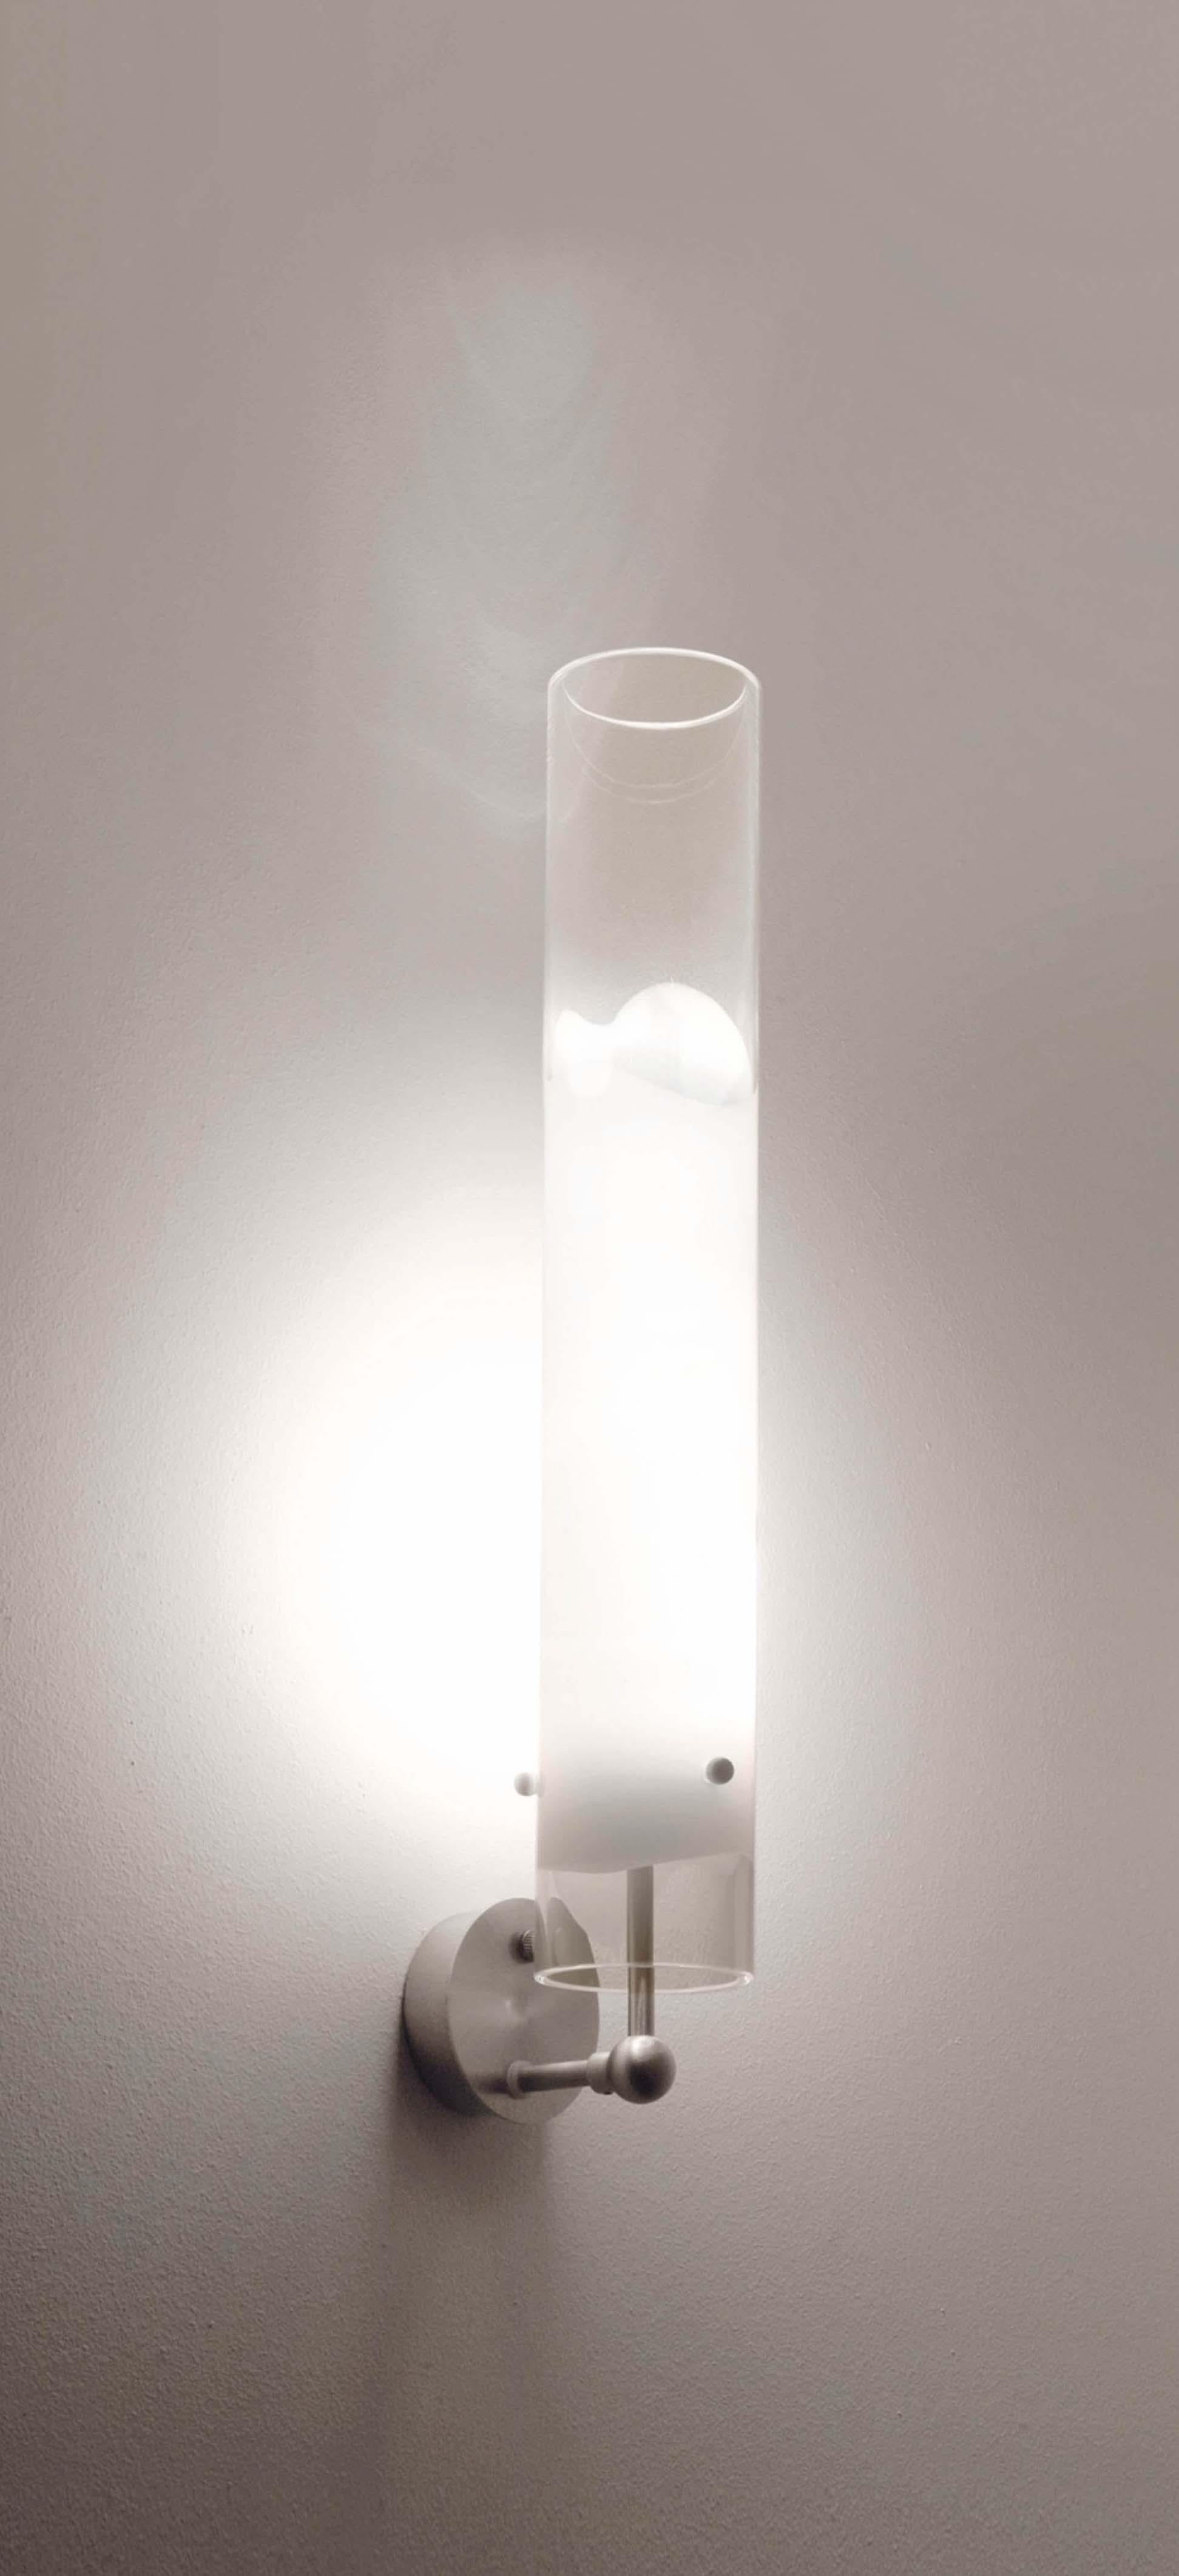 A comprehensive range of lamps that share a minimal, unobtrusive design that makes the most of the light source, which to the traslucid white band inserted in the glass.

Specifications:
Light source: E26
No of bulbs: 1 × 60 W E26
Dimmer: DIM